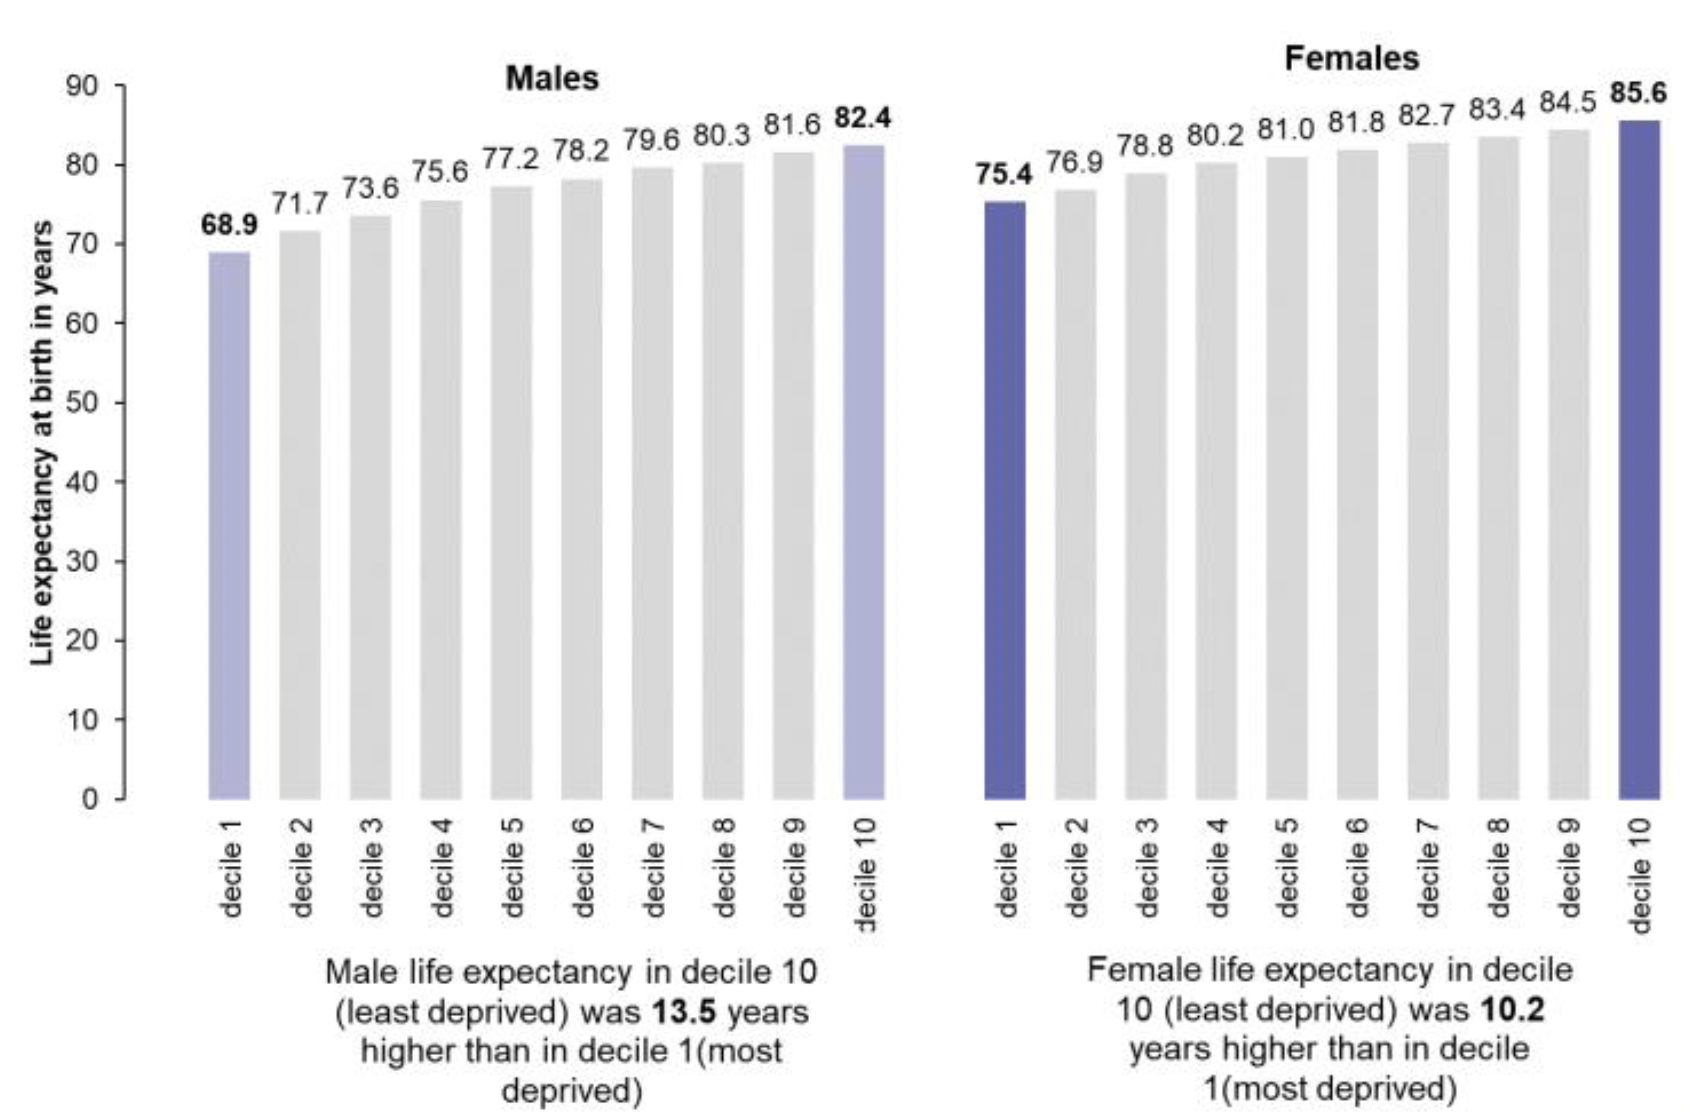 Bar chart showing that in 2018-2020:
• Male life expectancy in SIMD decile 10 (least deprived) was 13.5 years higher than in decile 1 (most deprived).
• Female life expectancy in SIMD decile 10 (least deprived) was 10.2 years higher than in decile 1 (most deprived).
